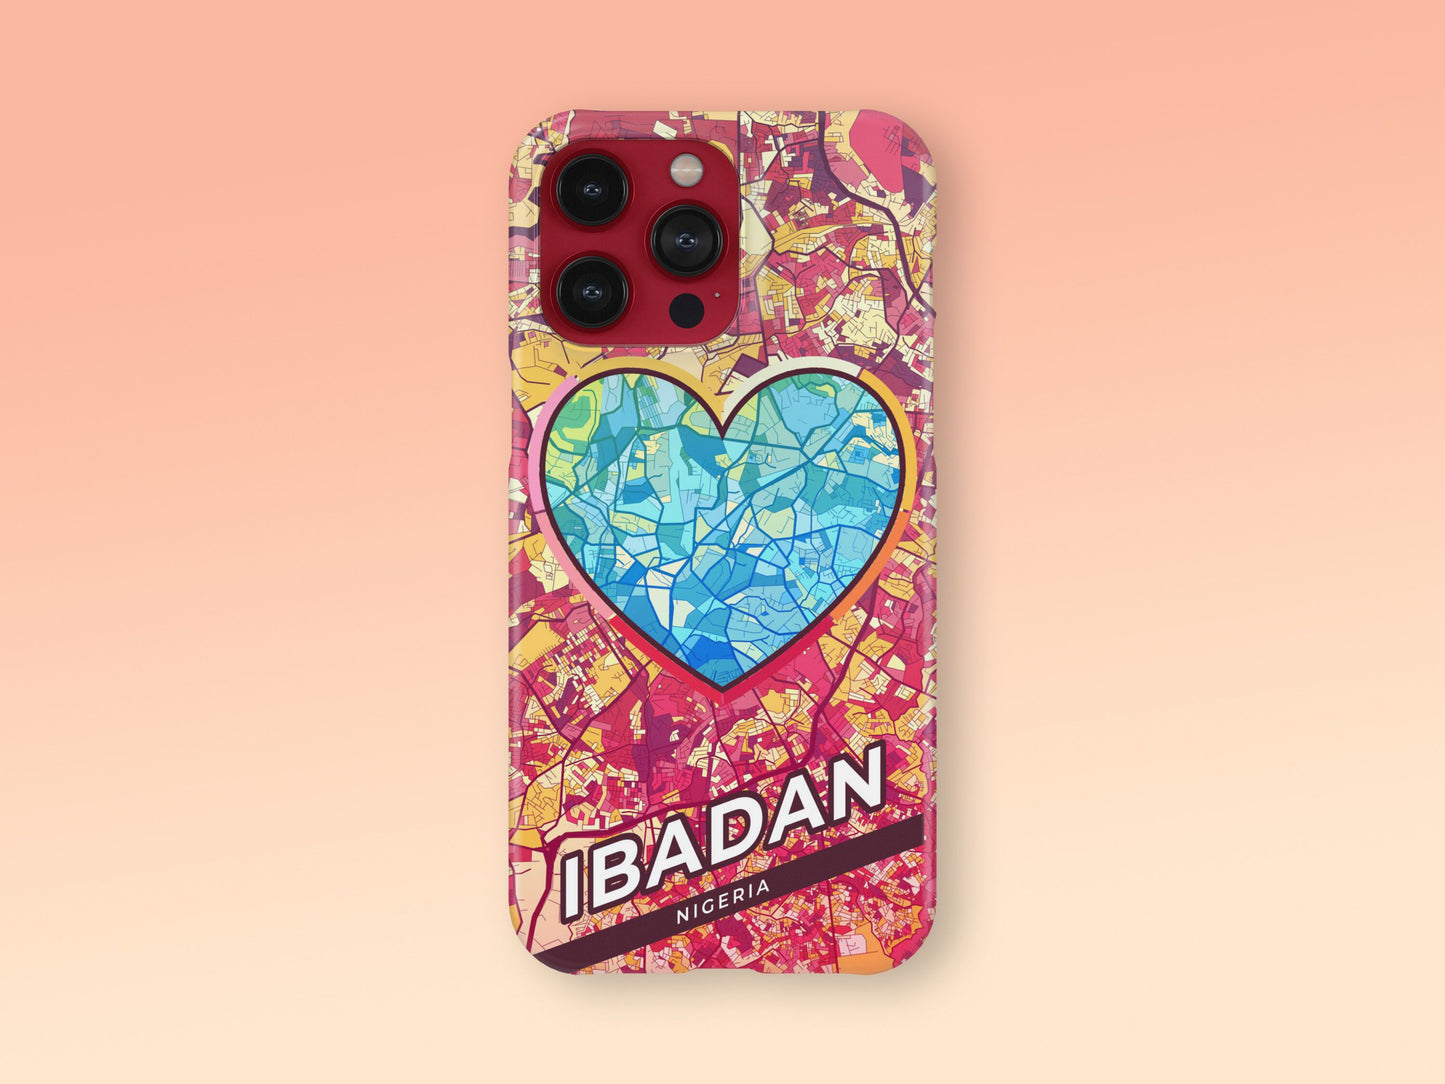 Ibadan Nigeria slim phone case with colorful icon. Birthday, wedding or housewarming gift. Couple match cases. 2